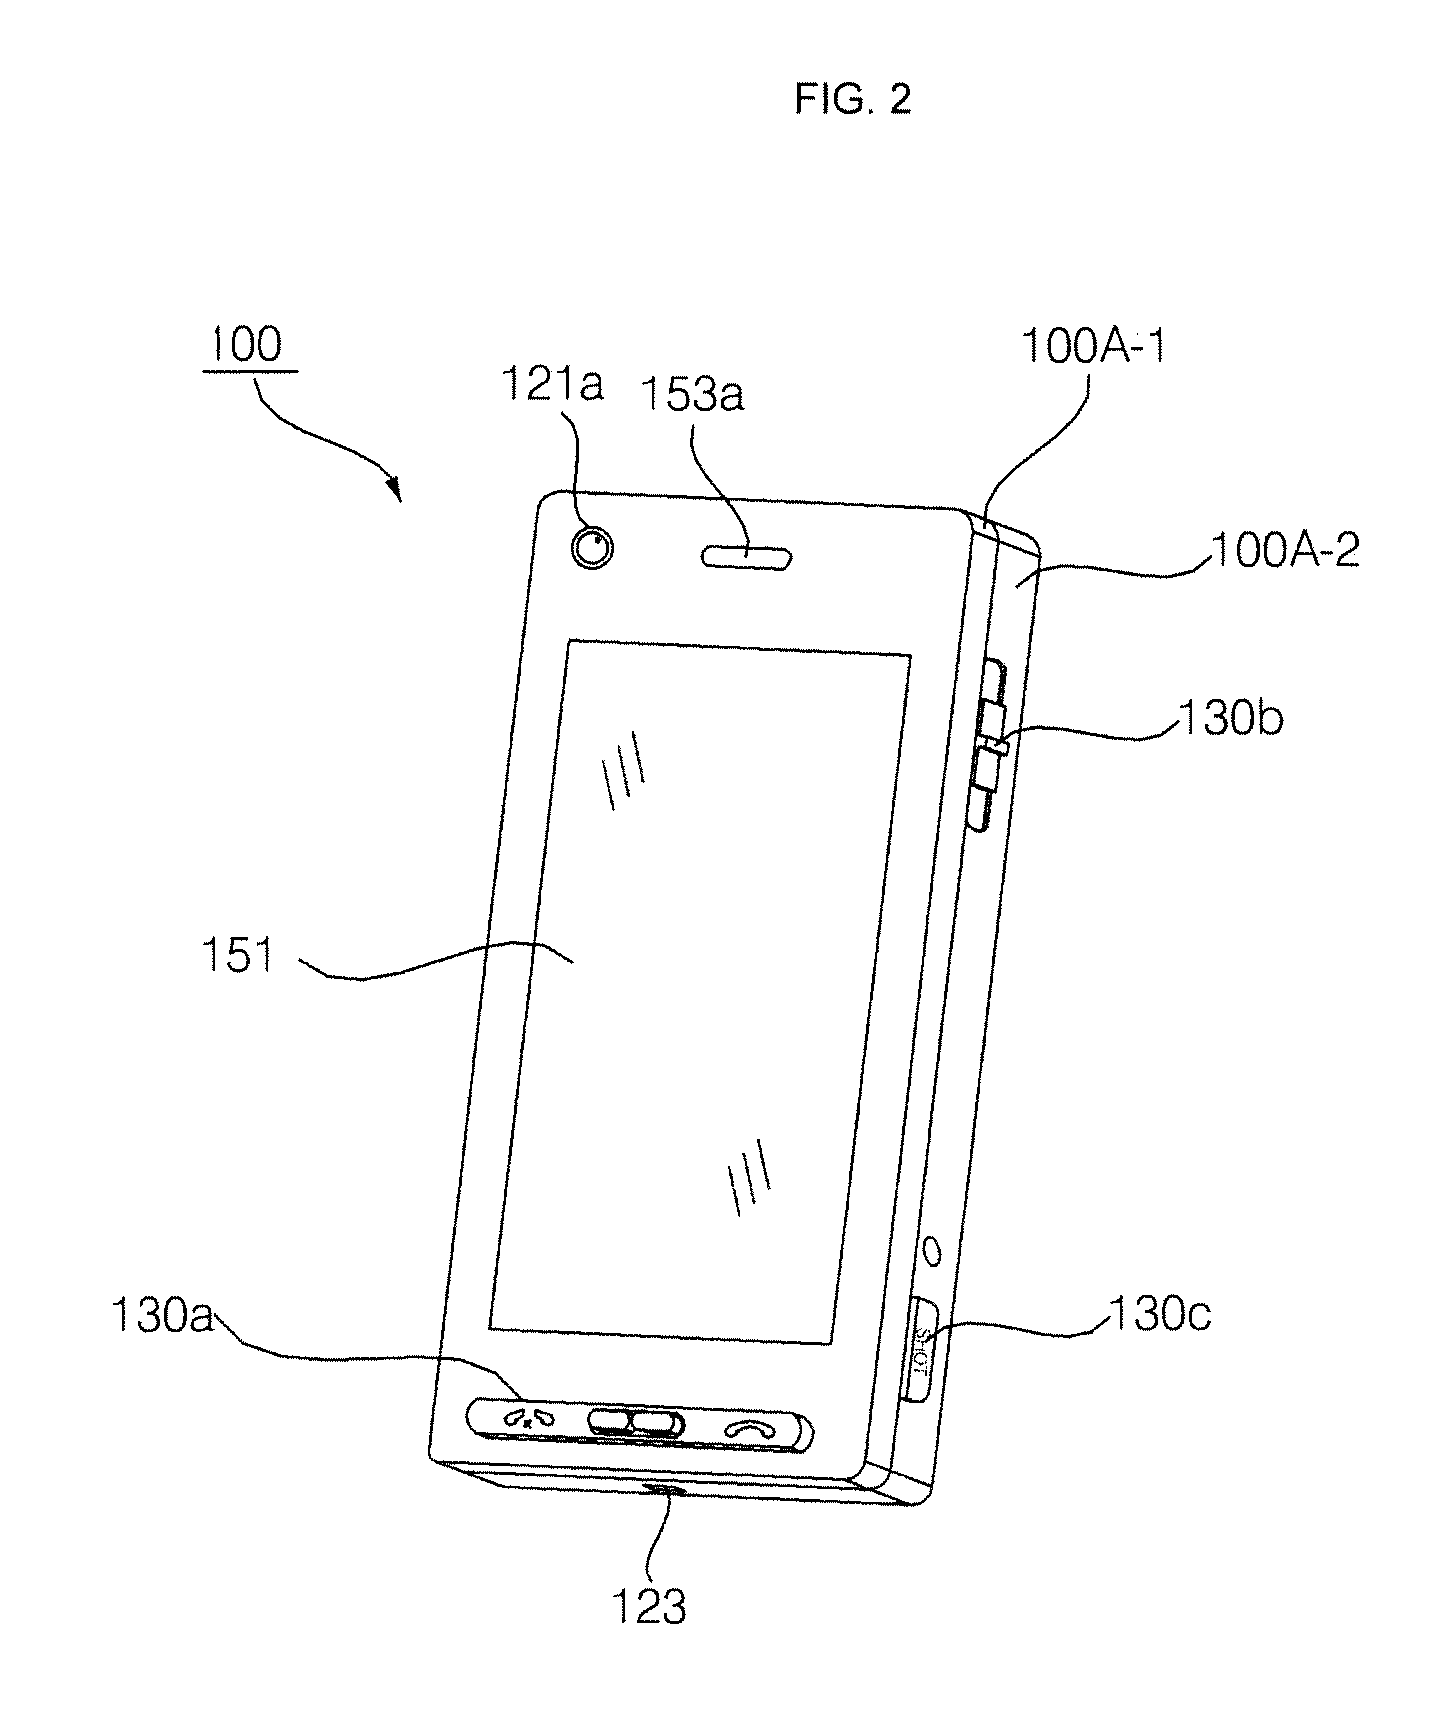 Mobile terminal and method of controlling operation of the mobile terminal